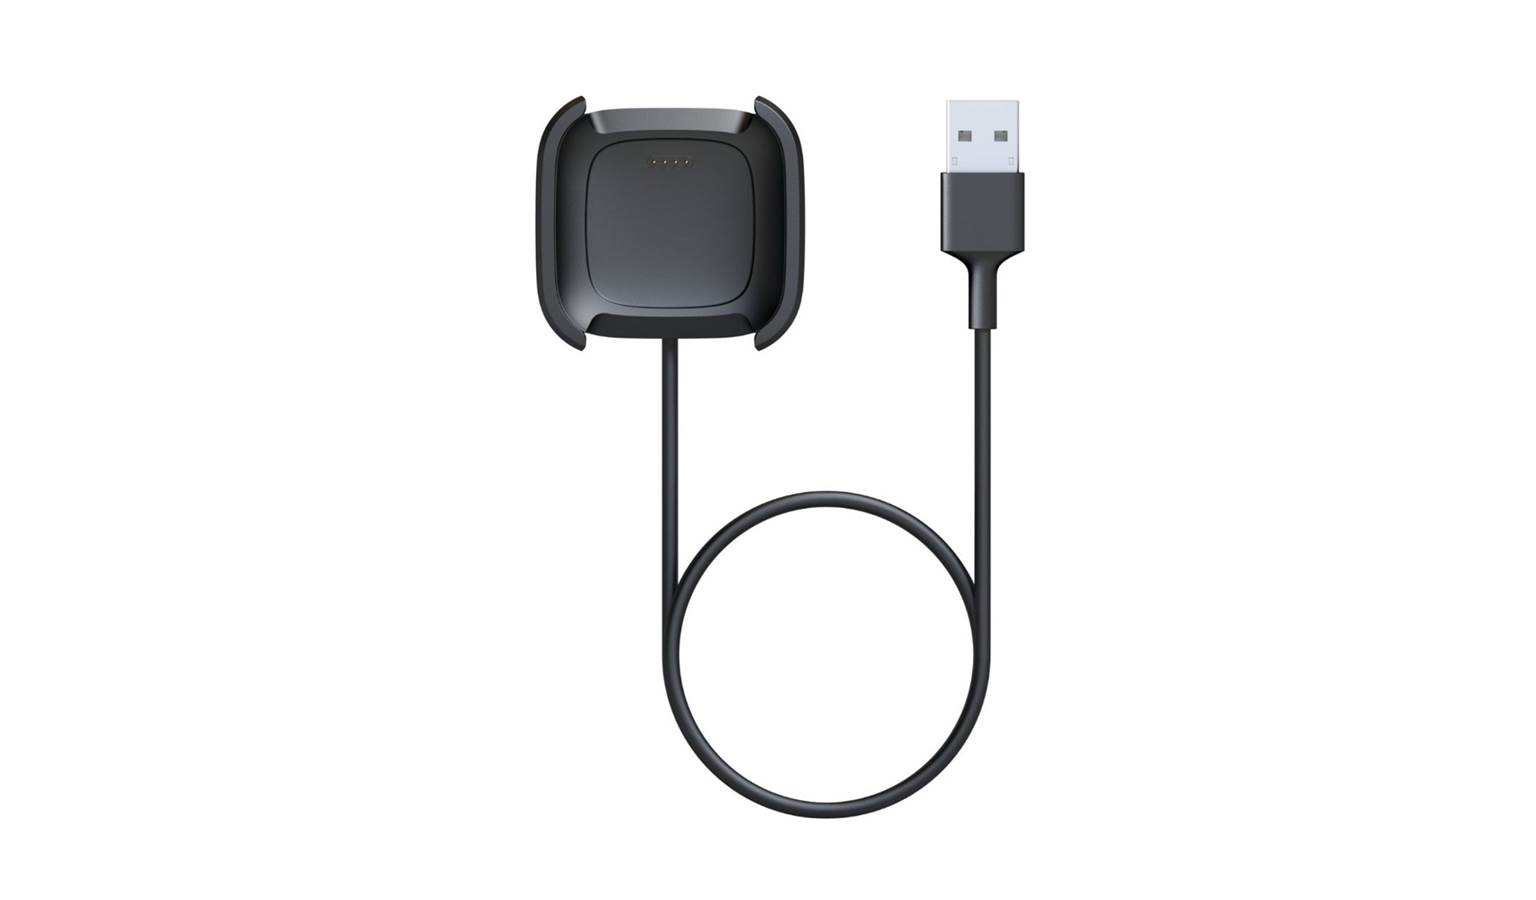 fitbit 404 charger